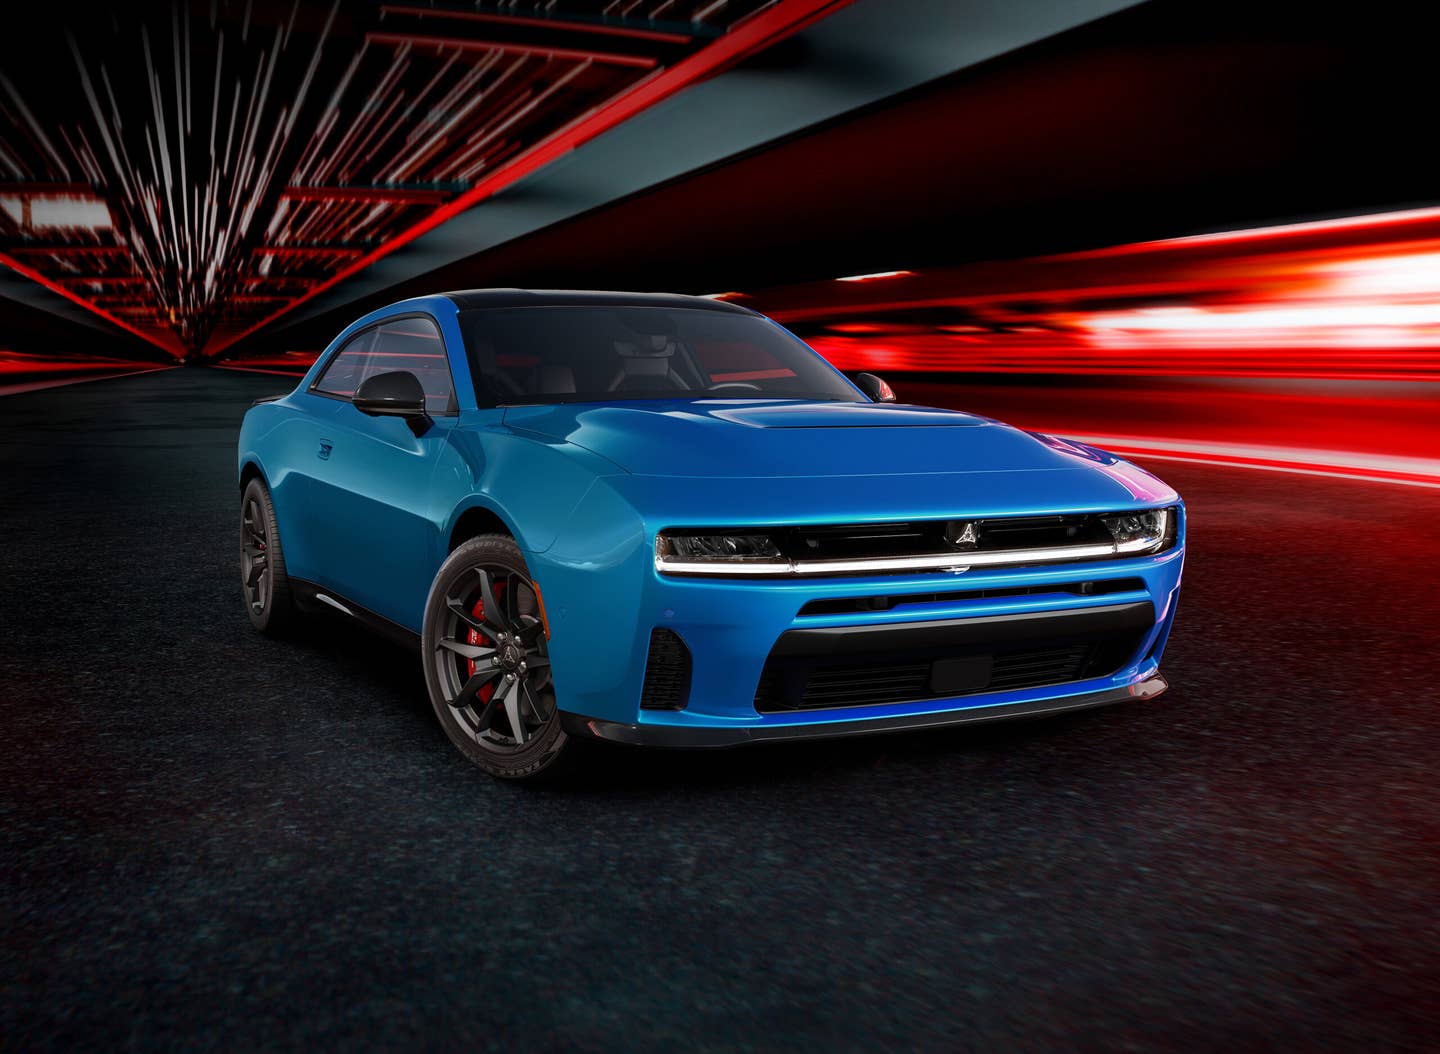 The all-new Dodge Charger offers performance choices via multi-energy powertrain options, including the 550-horsepower Dodge Charger SIXPACK H.O. (shown here) powered by the 3.0L Twin Turbo Hurricane High Output engine and the 420-horsepower Dodge Charger SIXPACK S.O. fueled by the 3.0L Twin Turbo Hurricane Standard Output engine.